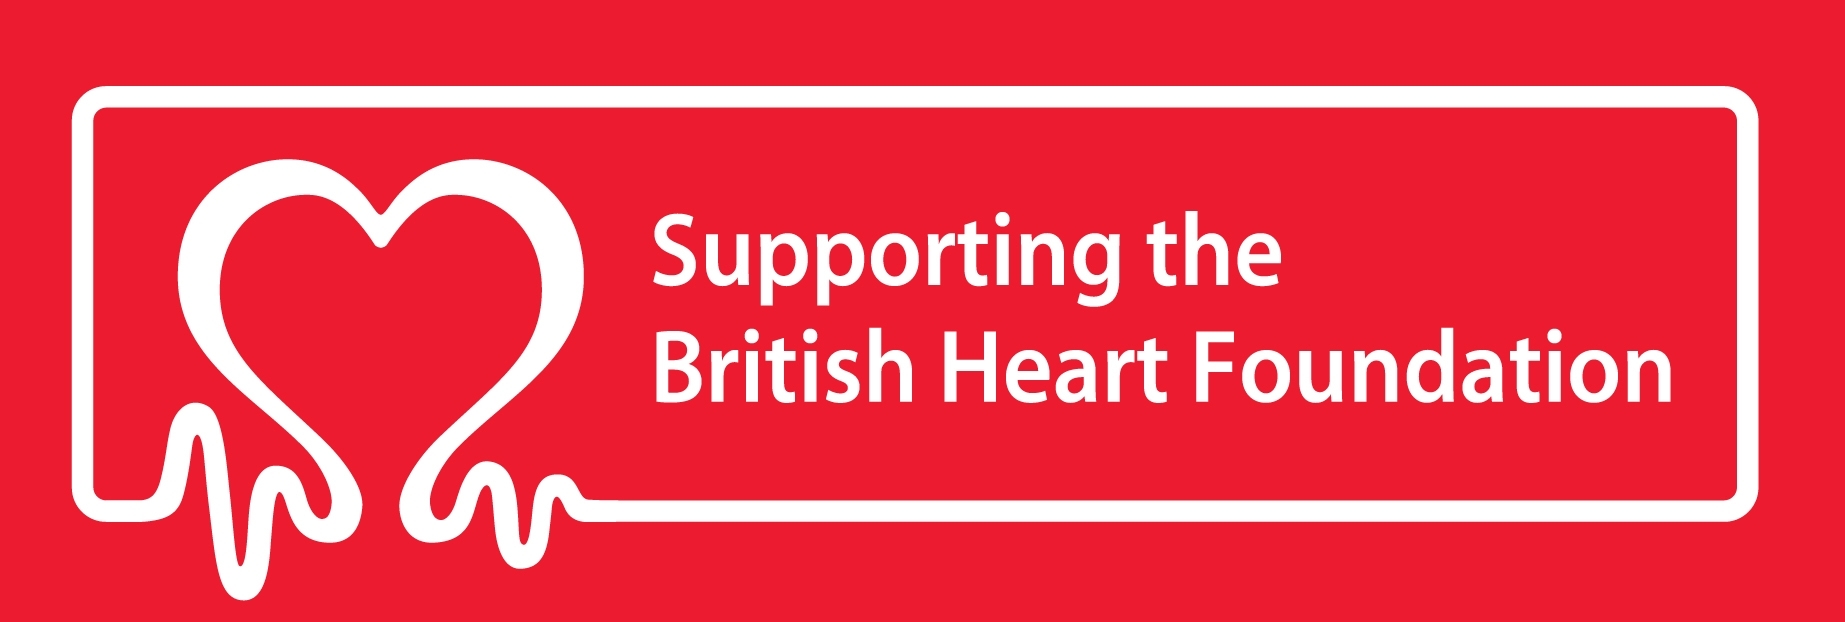 Oak Tree Mobility in support of the British Heart Foundation